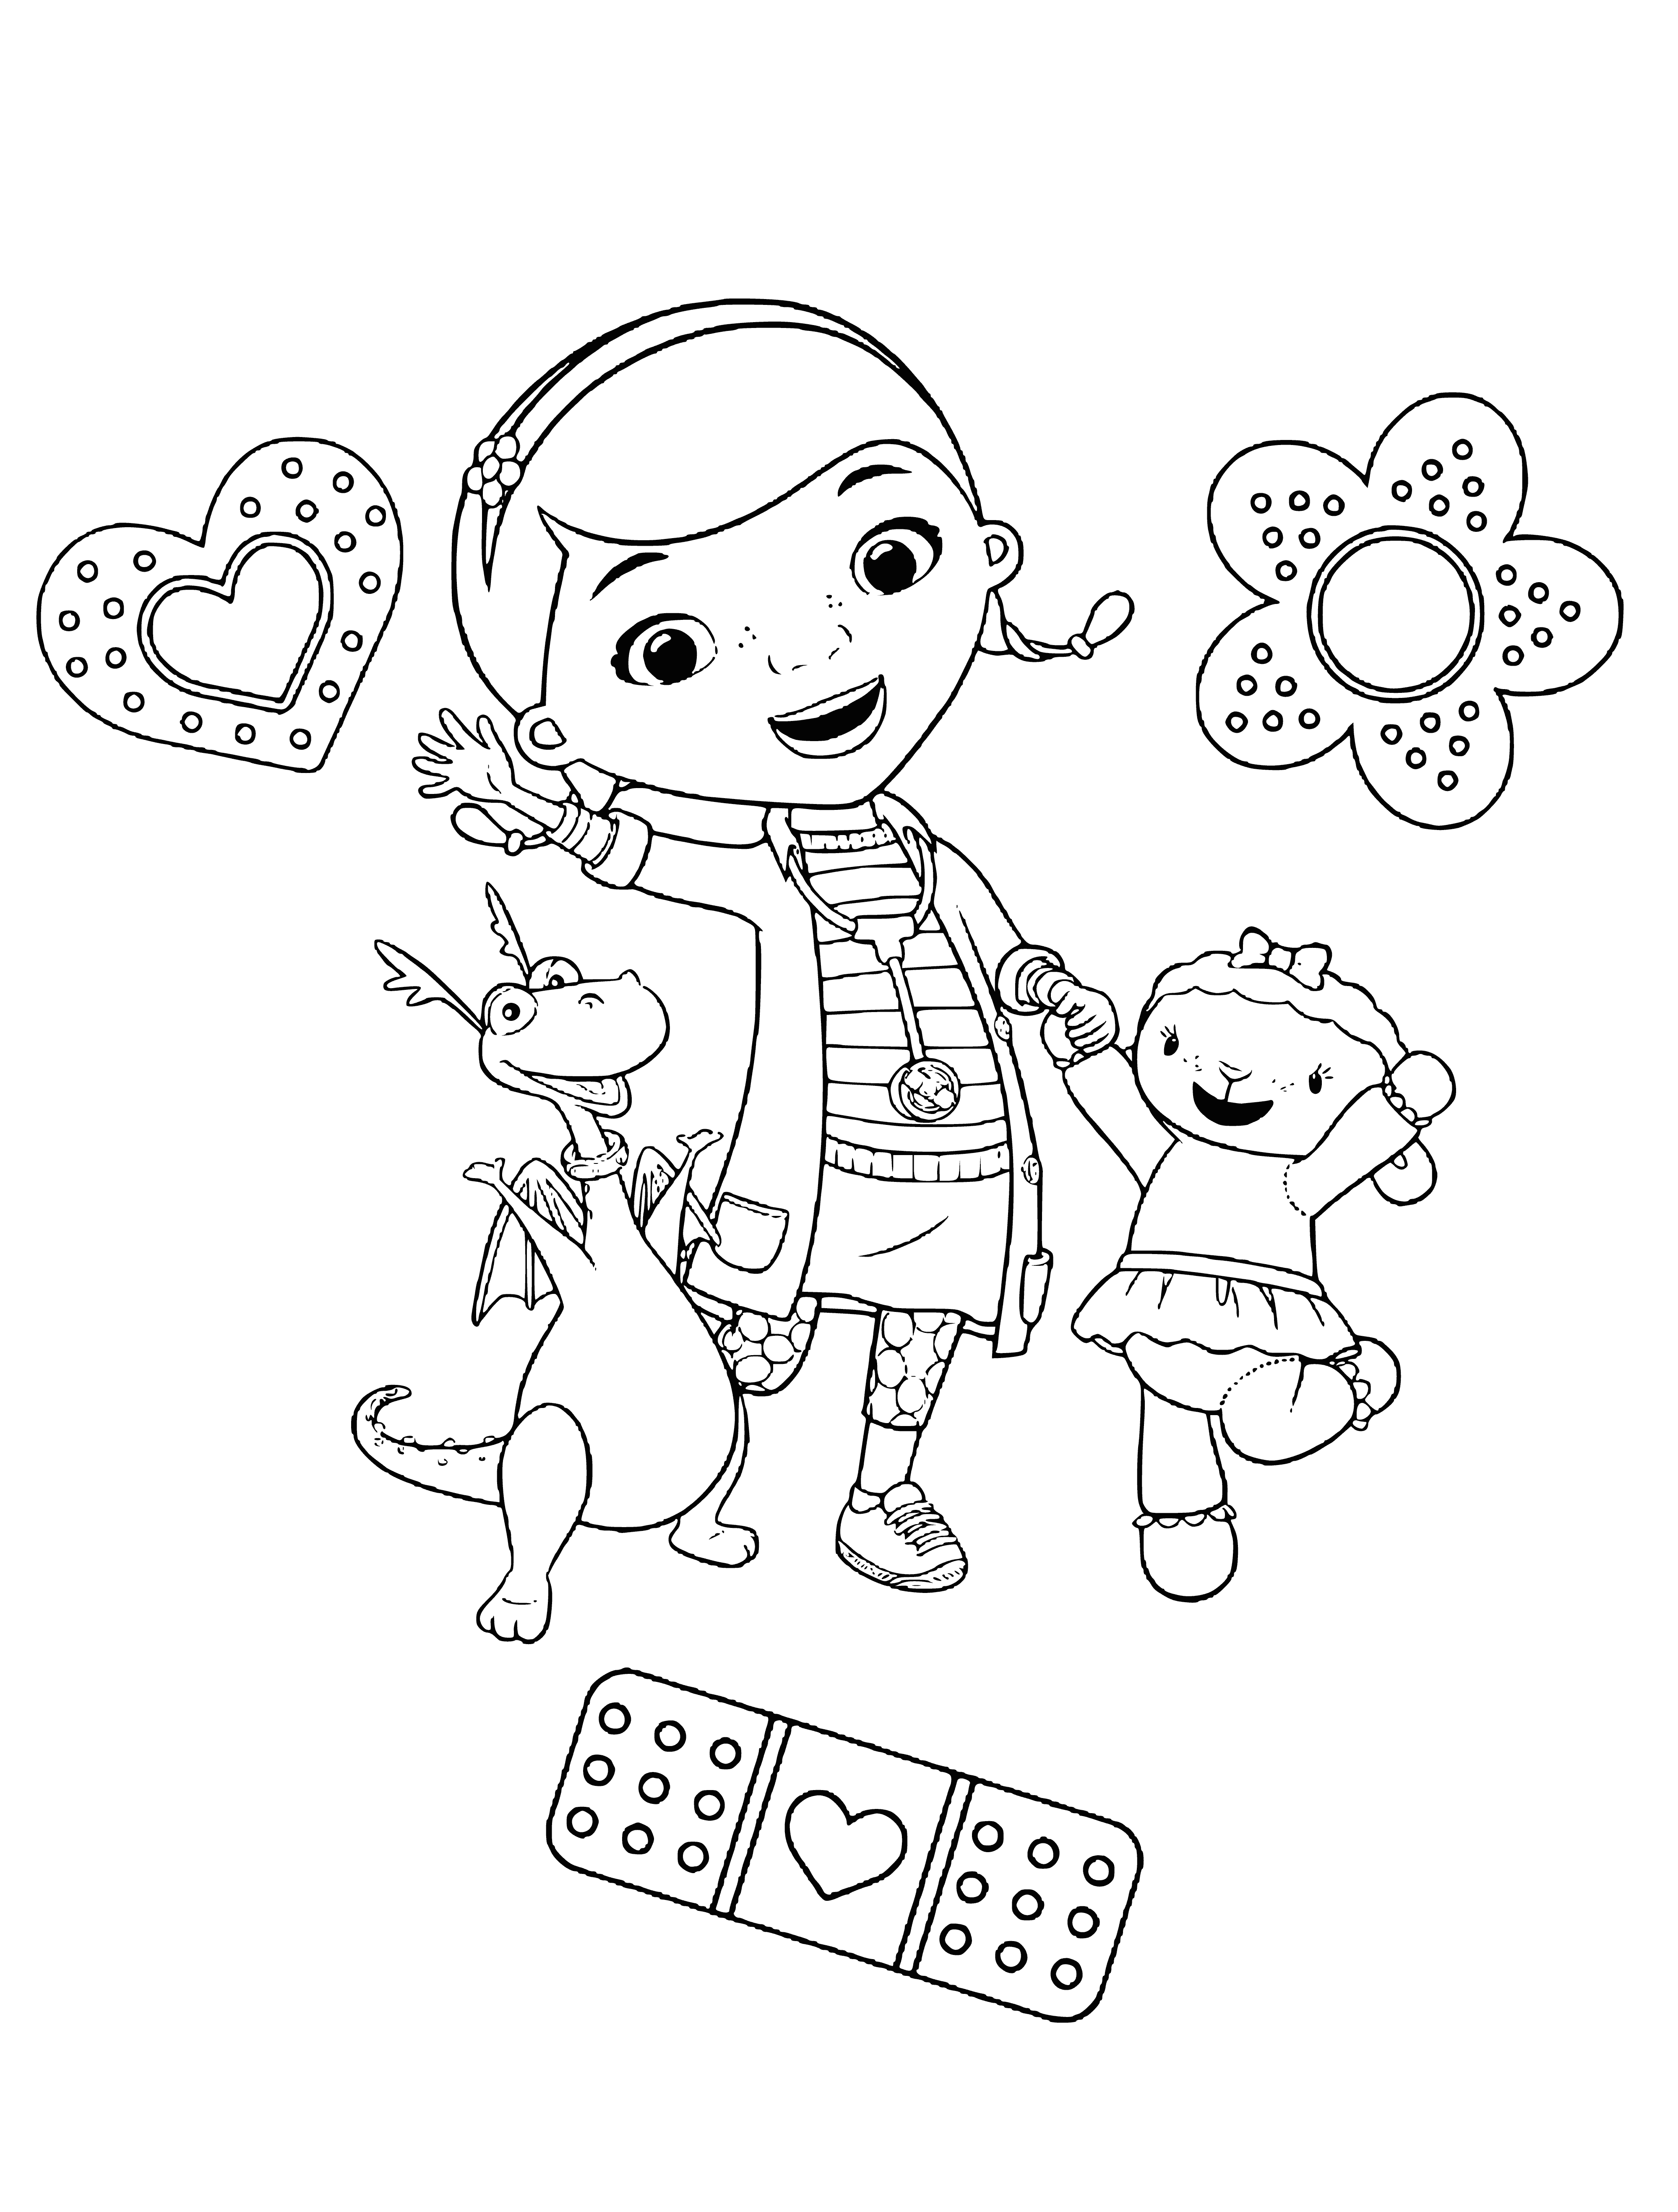 coloring page: Dotty and her friends admire the beauty of a hilltop garden of flowers. #DocMcStuffins #coloringpage